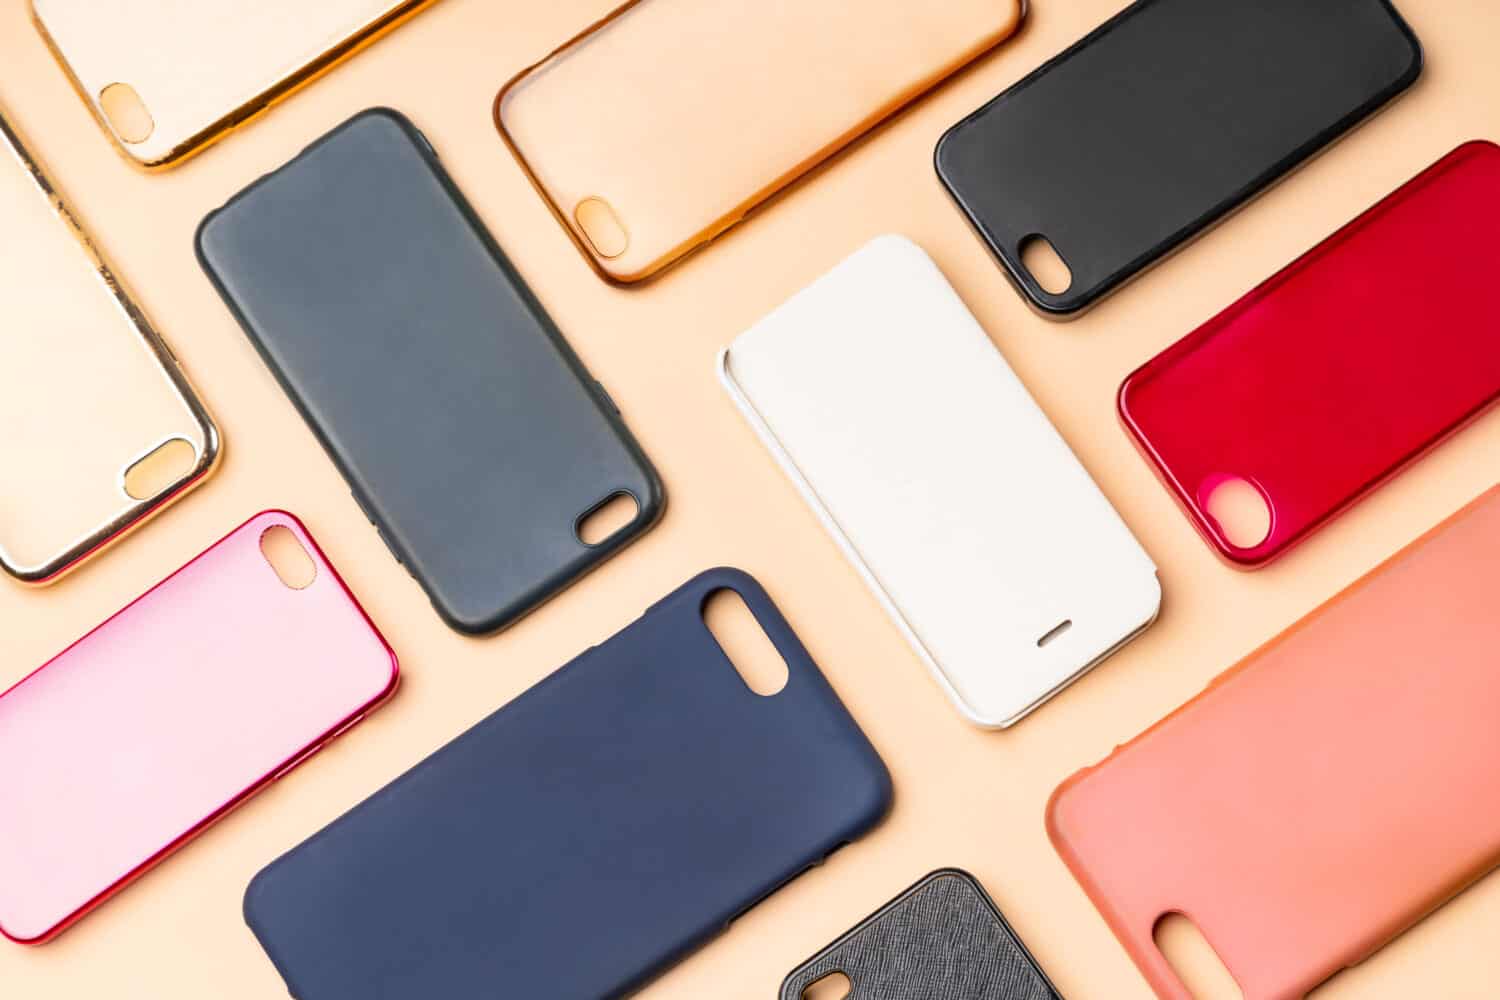 Pile of multicolored plastic back covers for mobile phone. Choice of smart phone protector accessories on neutral background. A lot of silicone phone backs or skins next to each other